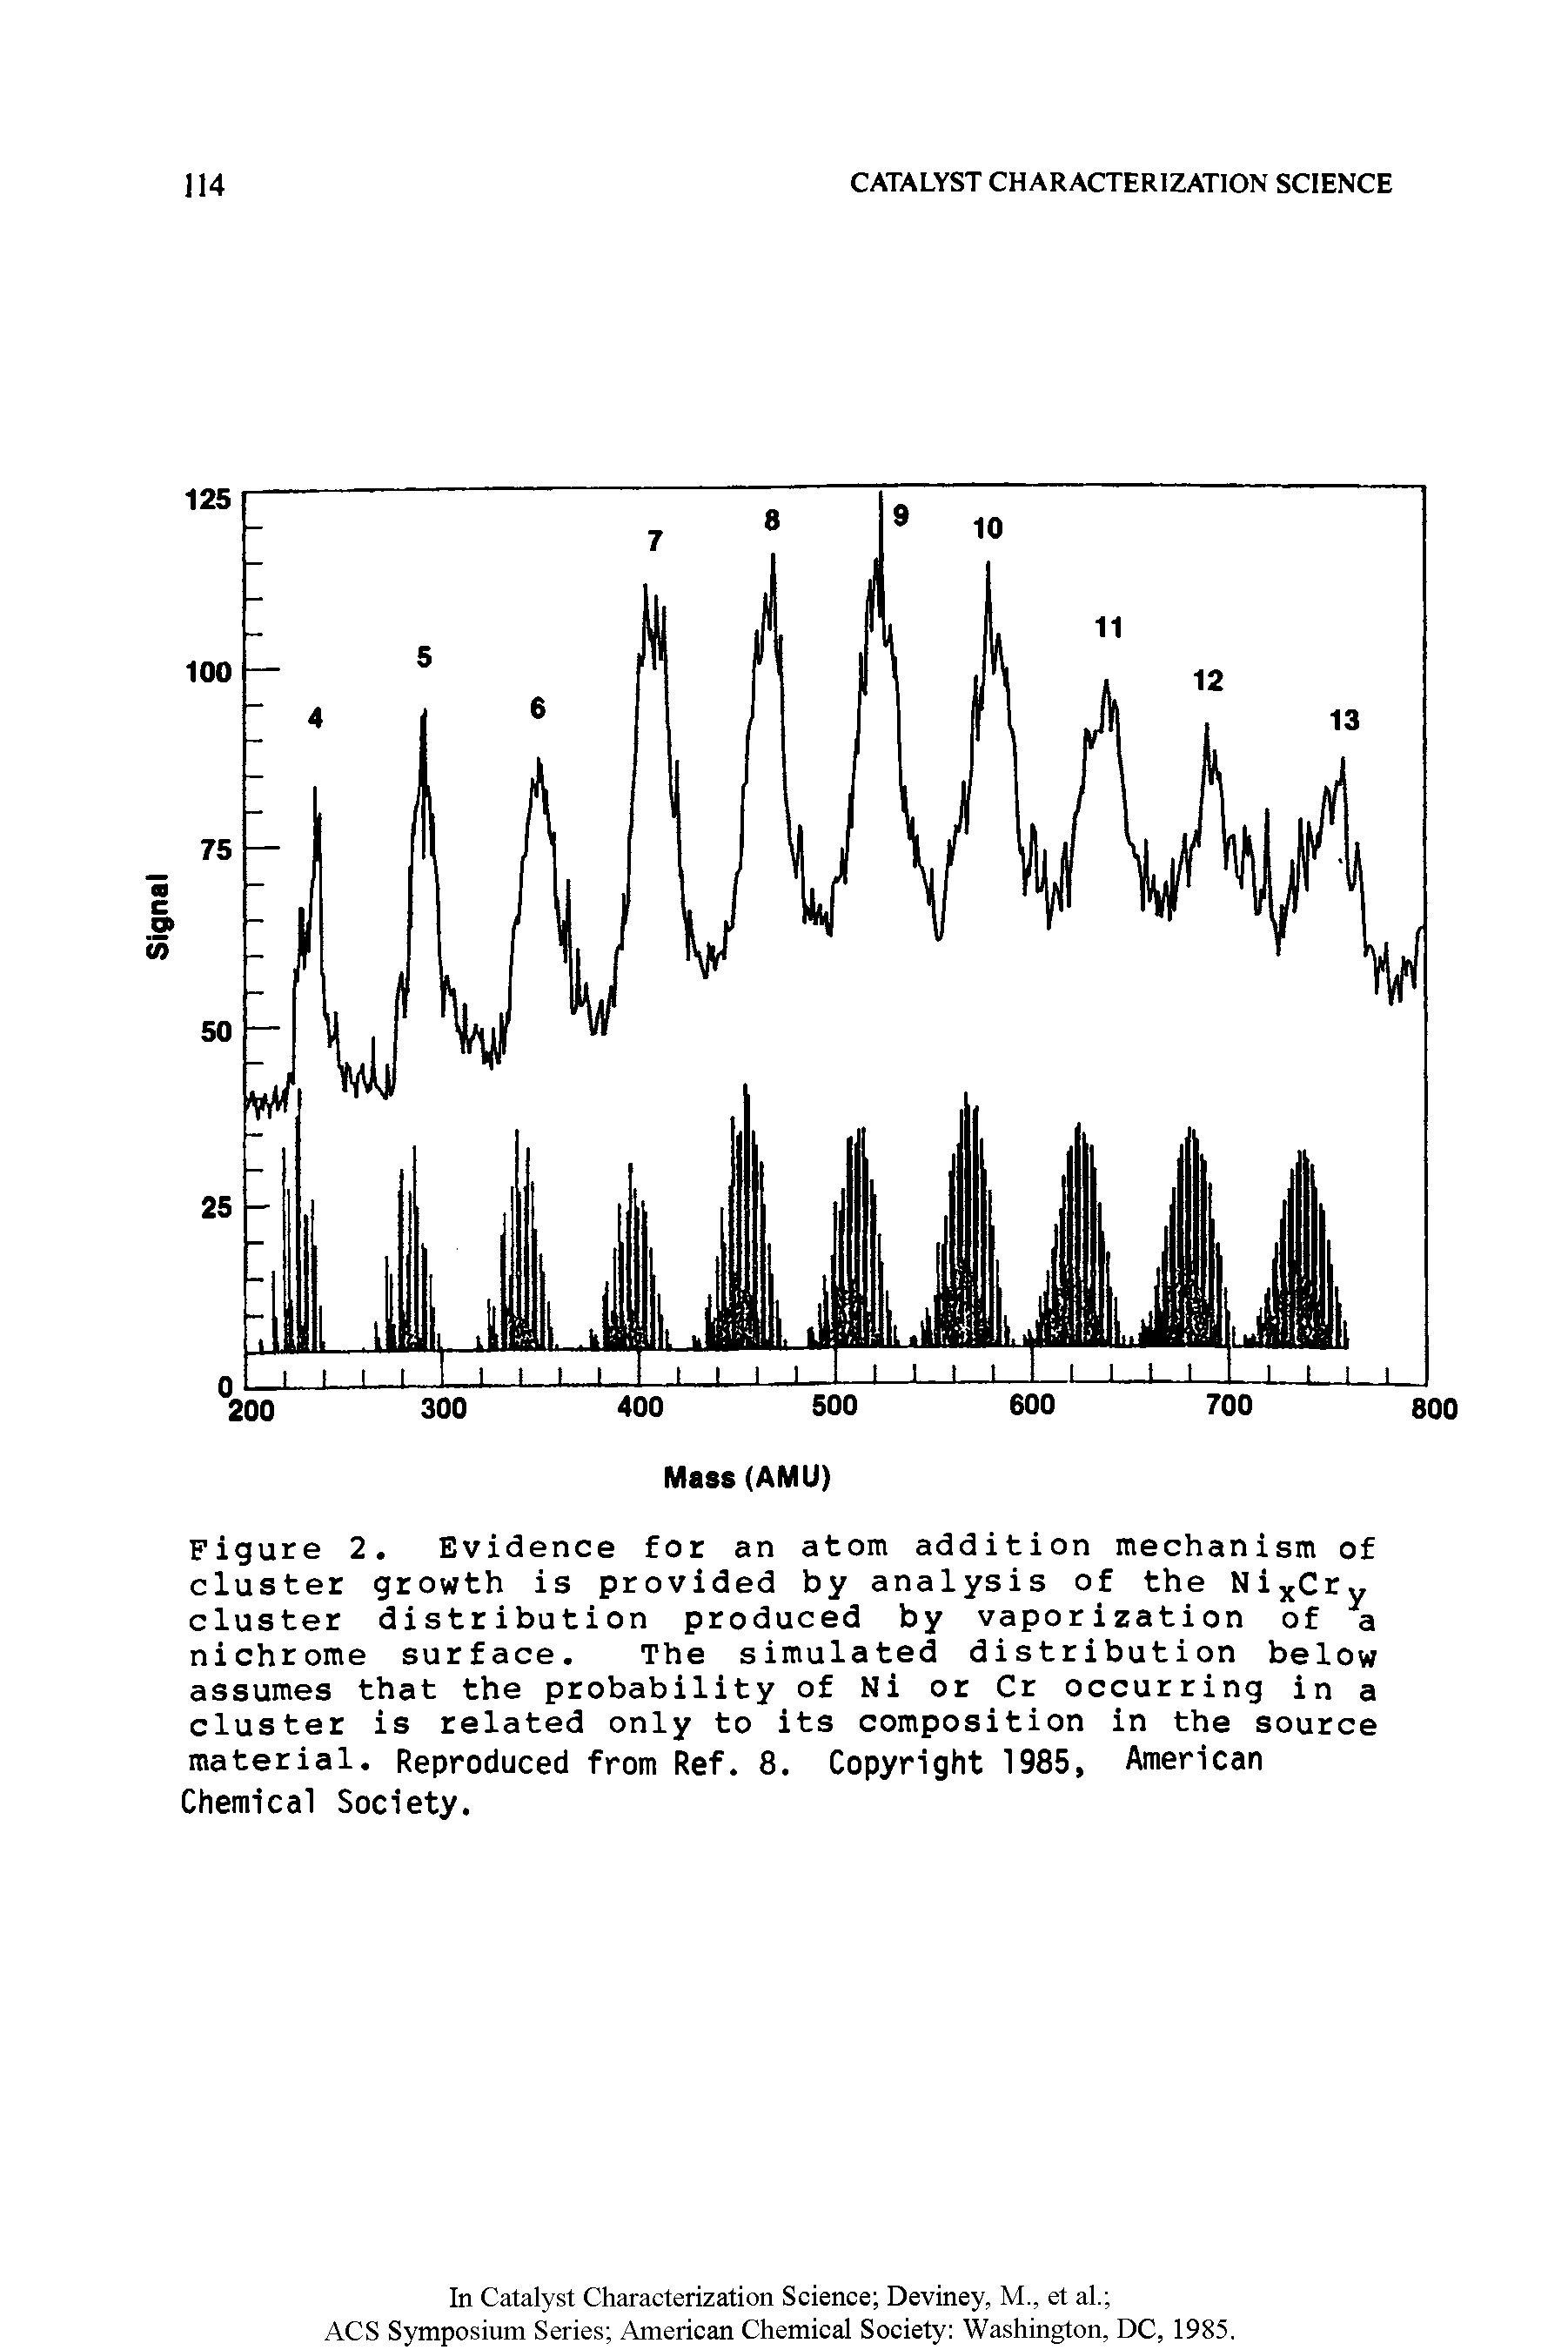 Figure 2. Evidence for an atom addition mechanism of cluster growth is provided by analysis of the Ni Cry cluster distribution produced by vaporization of a nichrome surface. The simulated distribution below assumes that the probability of Ni or Cr occurring in a cluster is related only to its composition in the source material. Reproduced from Ref. 8, Copyright 1985, American Chemical Society.